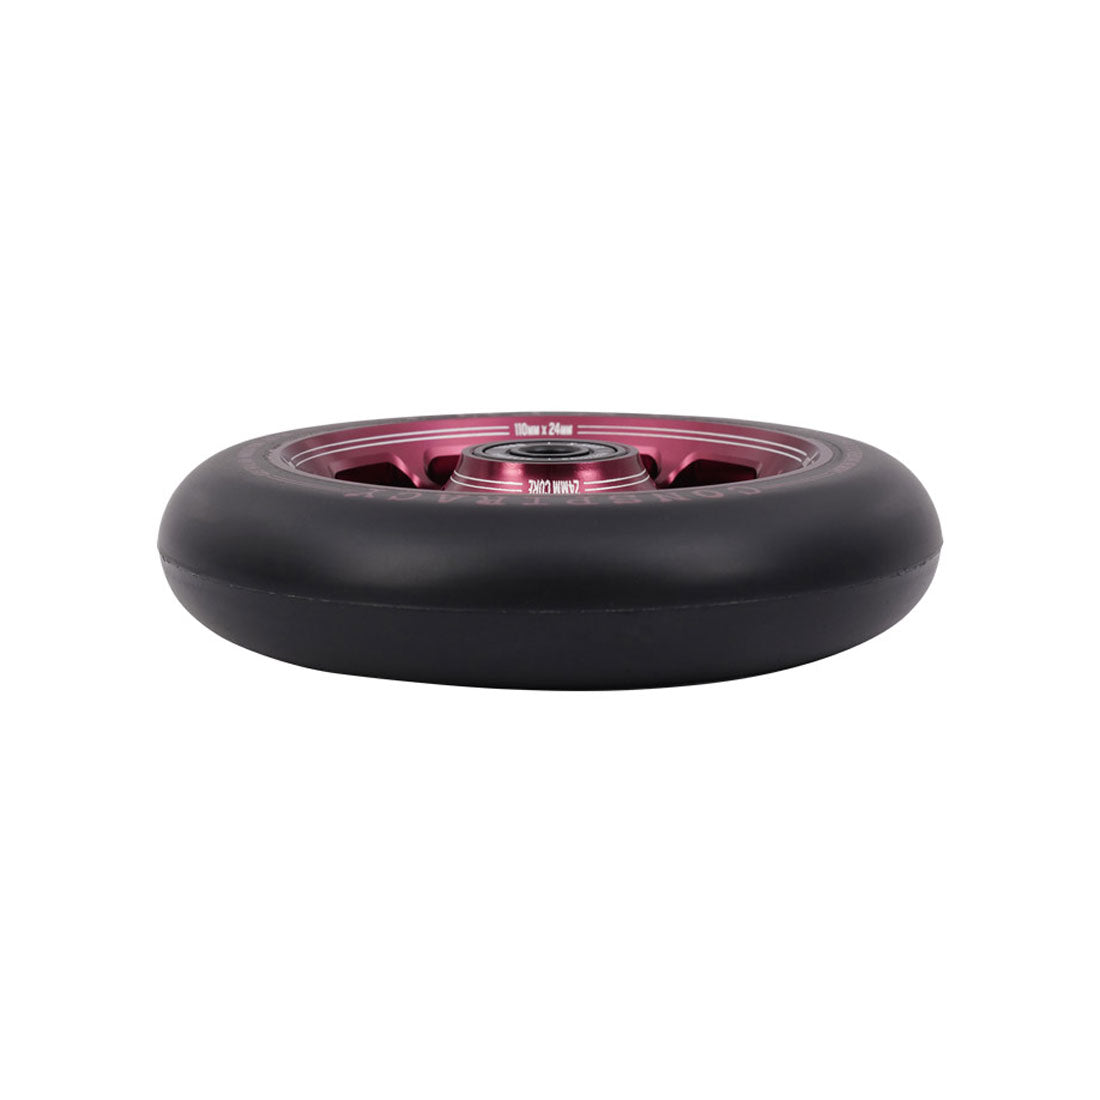 Triad Conspiracy 110mm Wheel - Ano Red Scooter Wheels